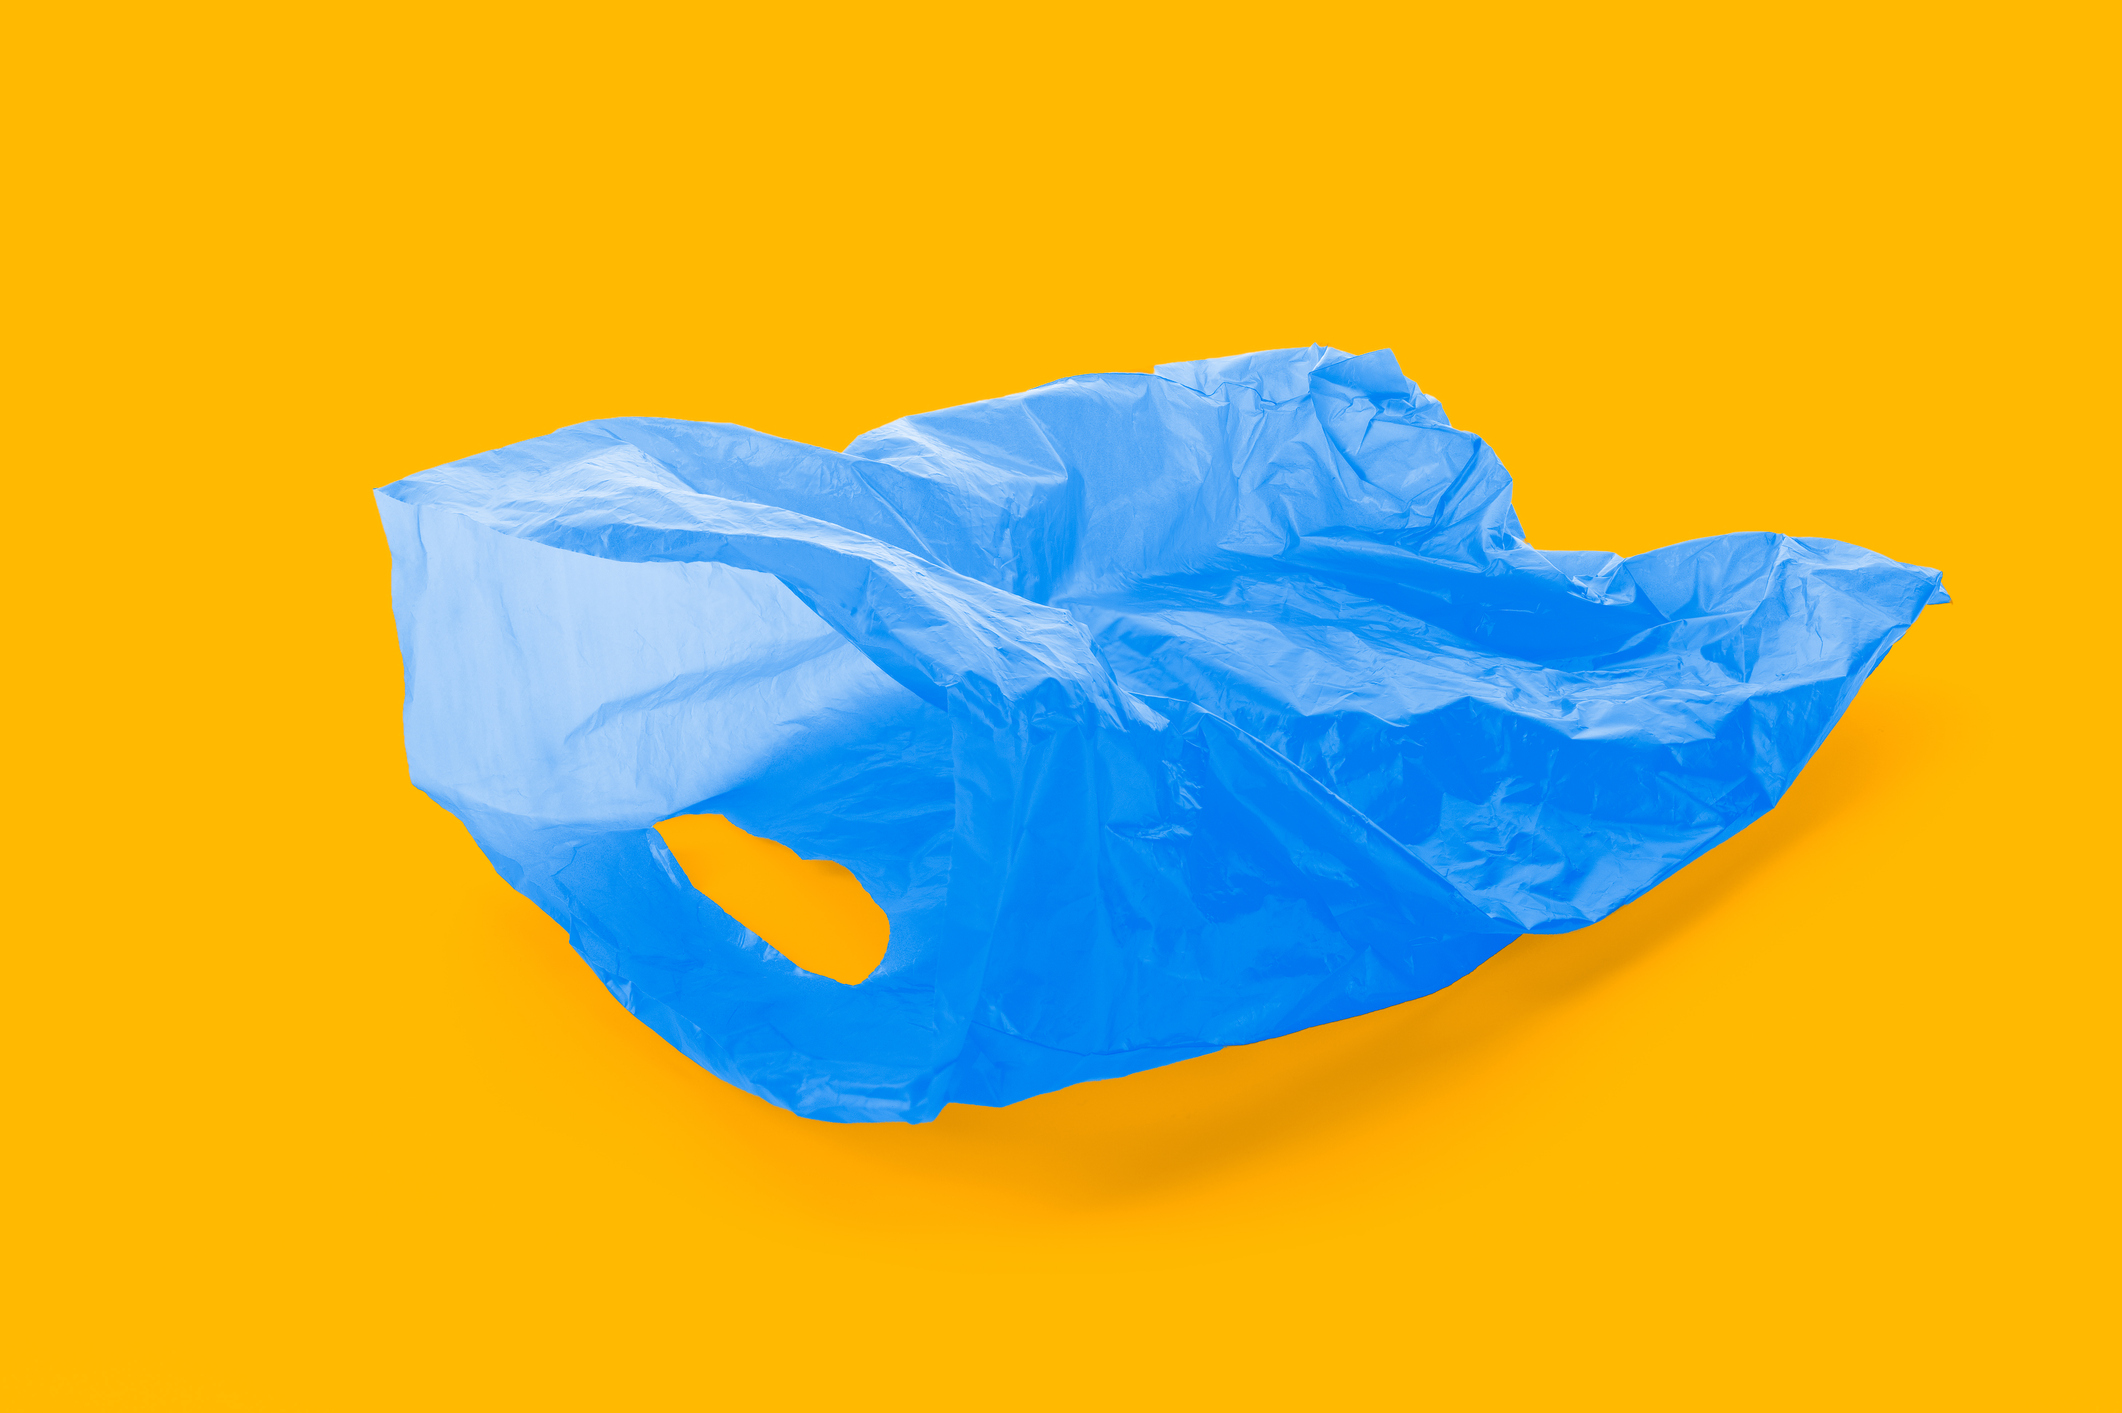 Upcycling: Turning plastic bags into adhesives